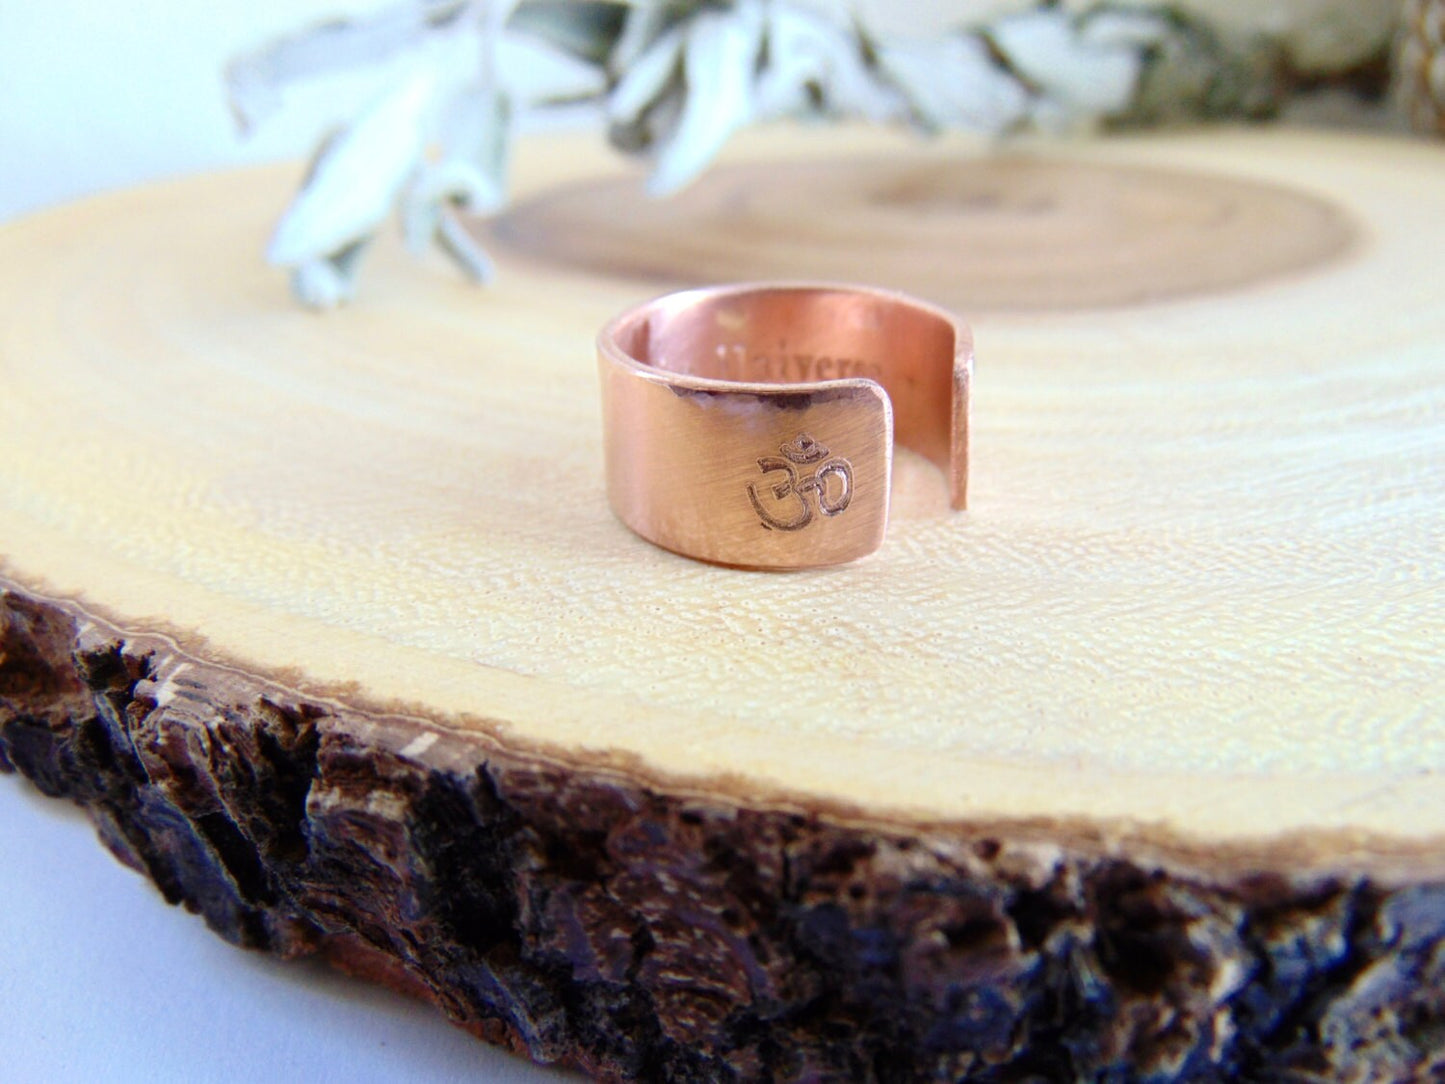 OM, Yoga, Secret message ring custom quote ring adjustable wide copper band Personalized engraved Ring spiritual jewelry Trust The Universe